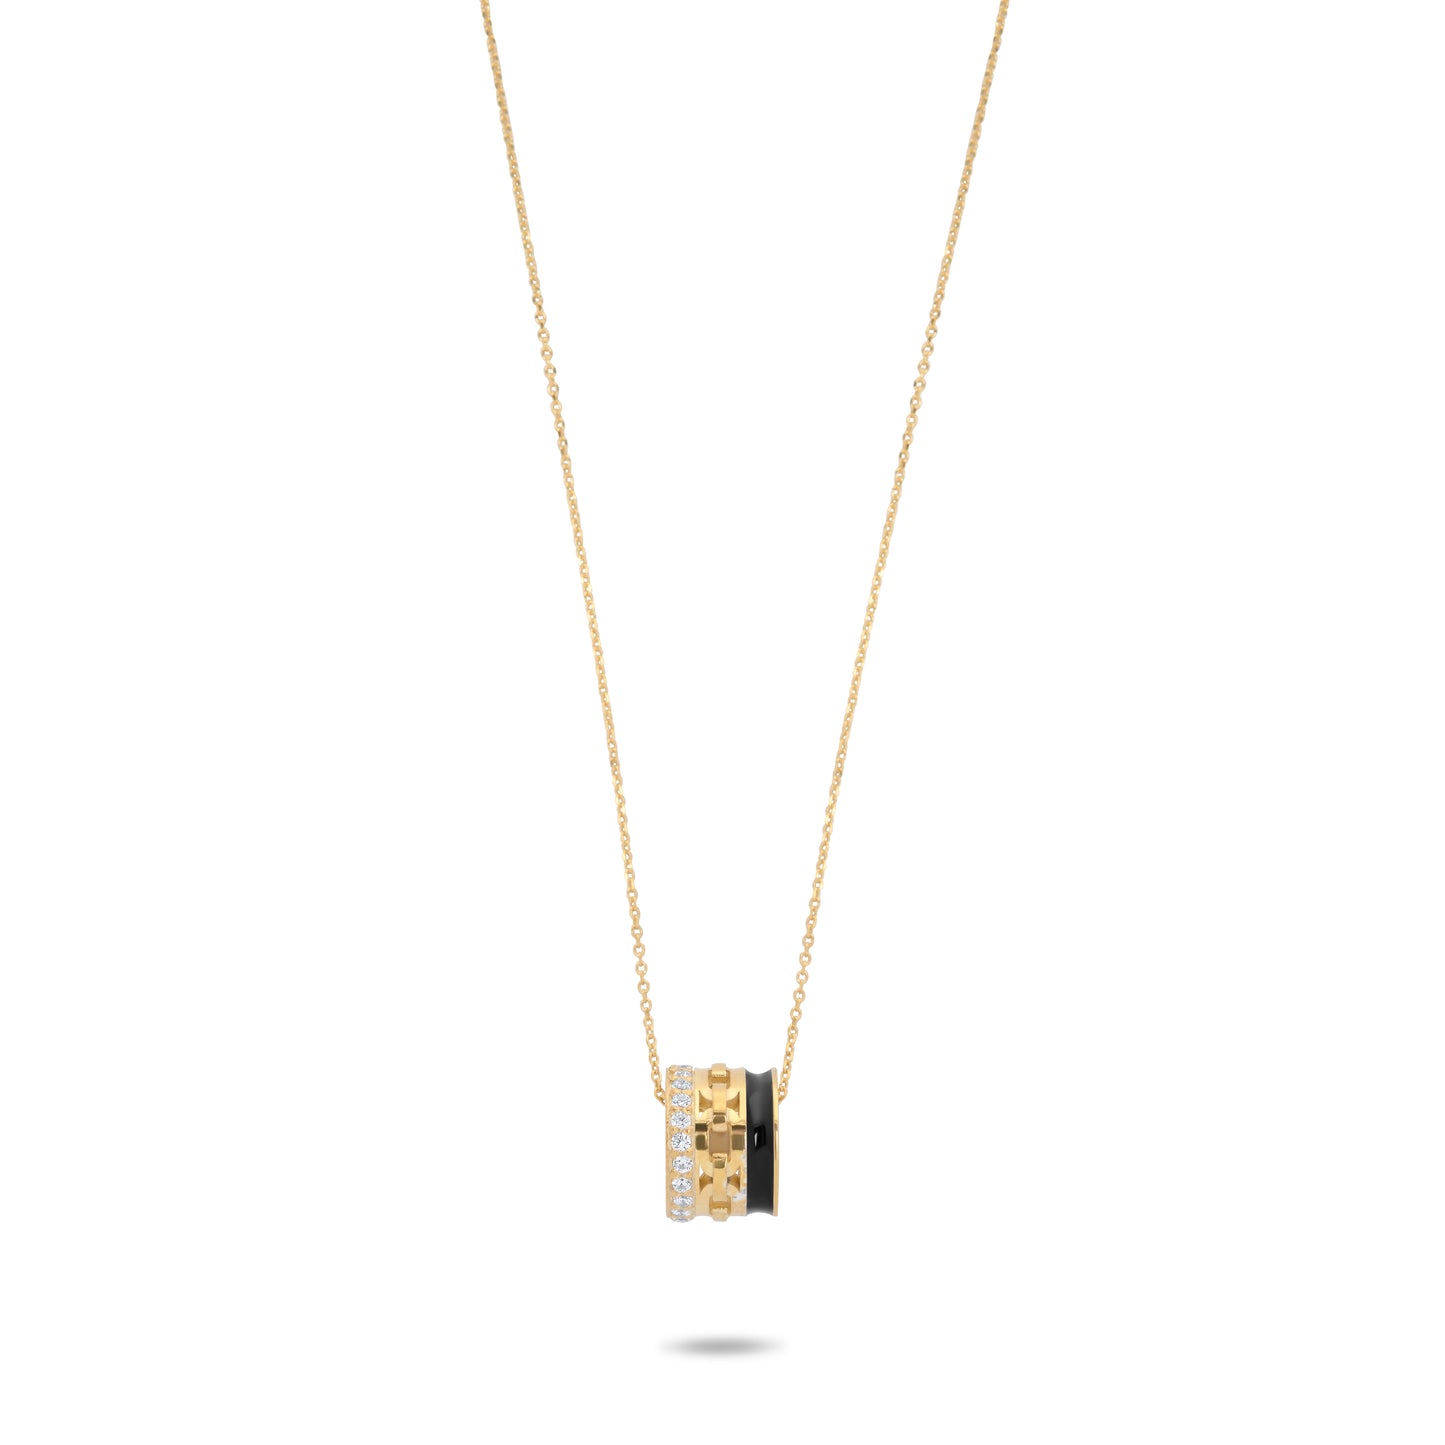 Black Enamel Roll Necklace  - Gold Plated